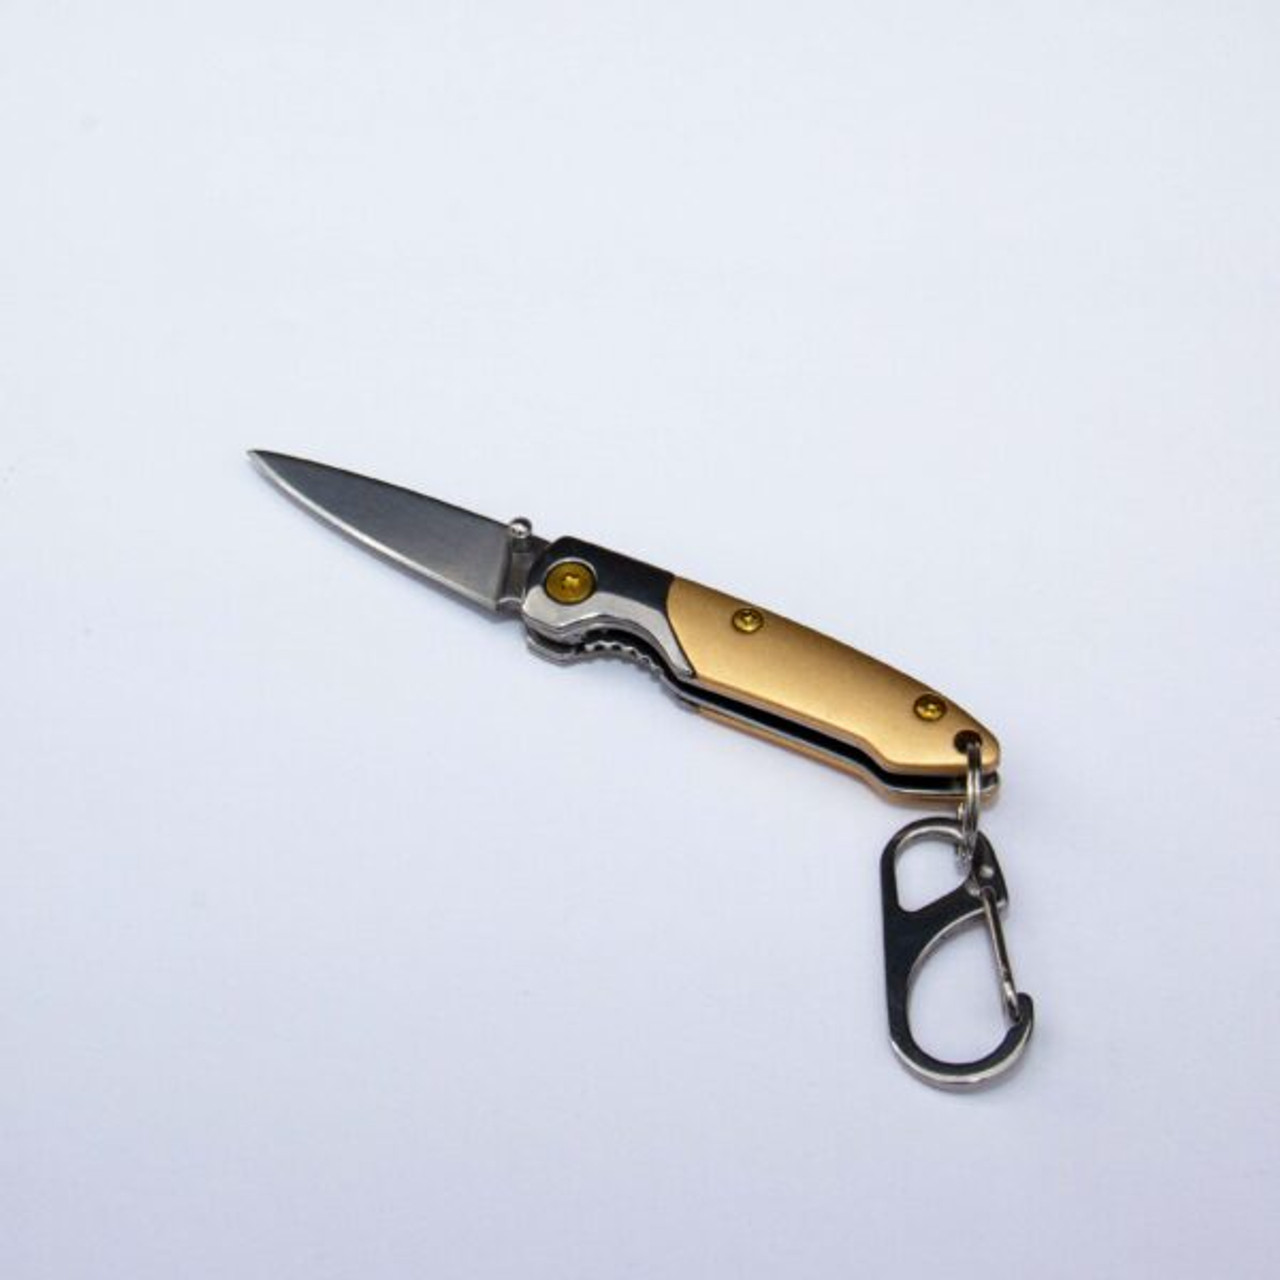 product image for Brighten Blades Gold Digger BB 132 Keychain Knife